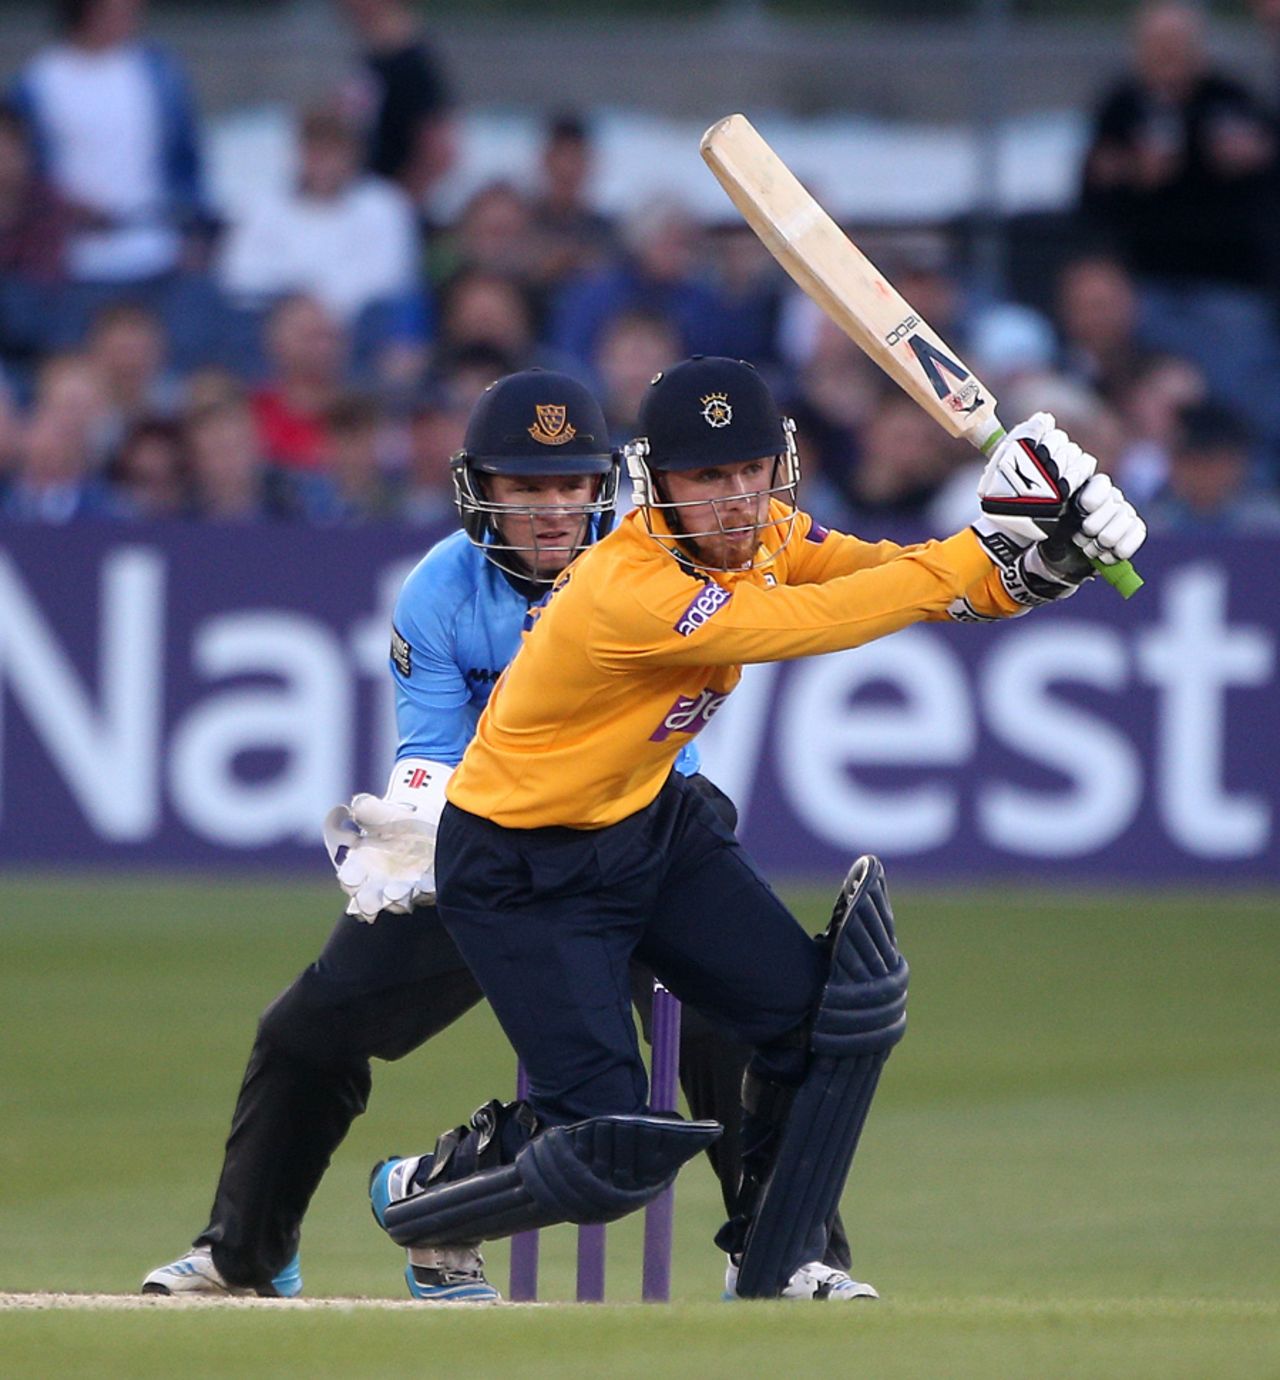 Adam Wheater attacks, Sussex v Hampshire, NatWest T20 Blast, Hove, May 23, 2014